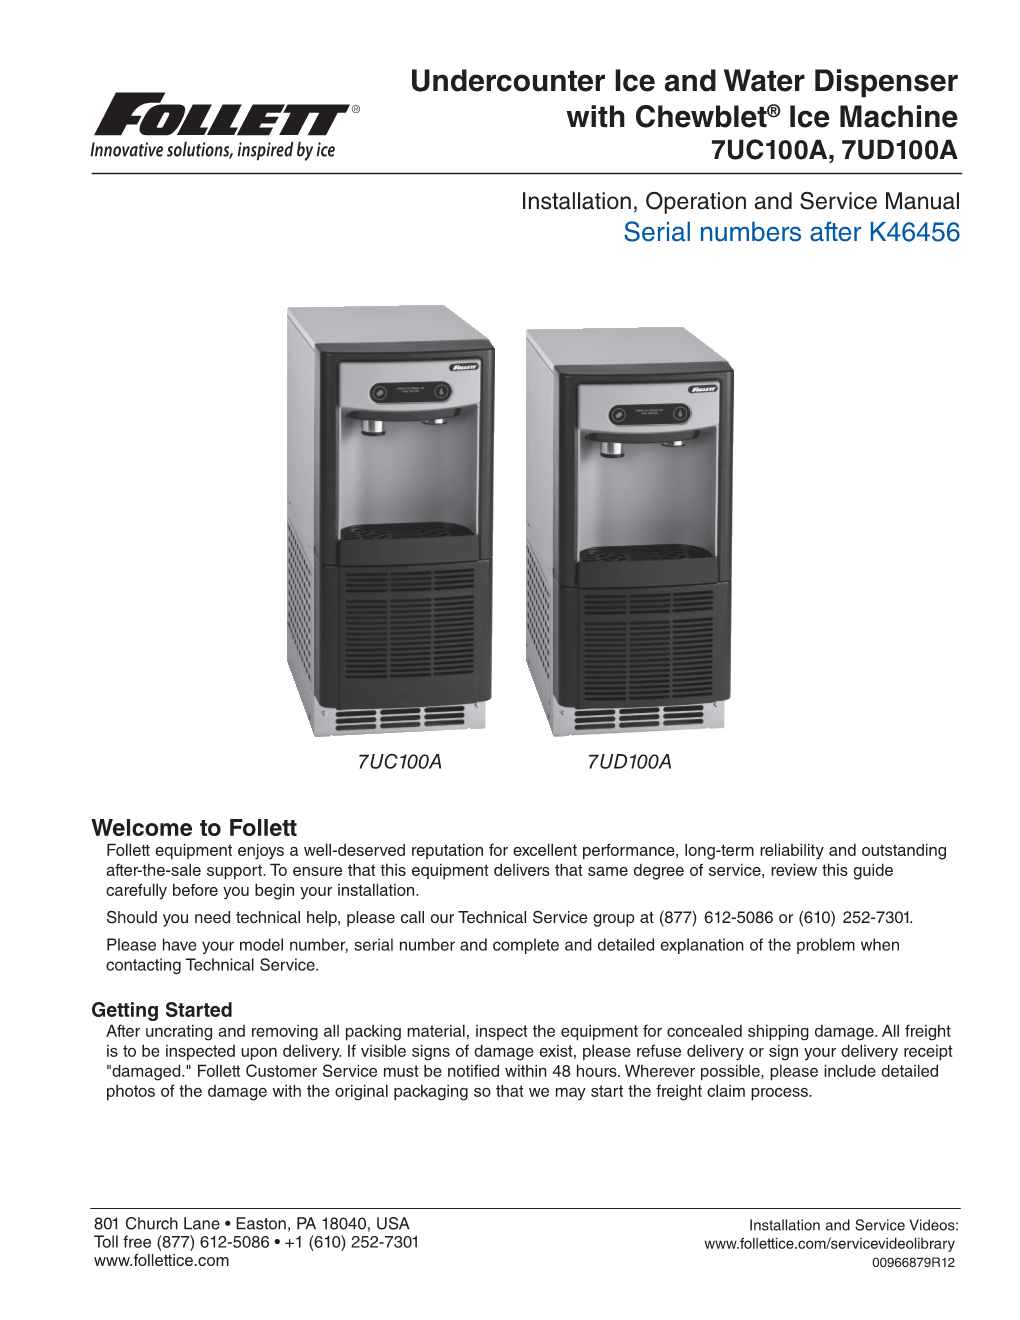 Undercounter Ice and Water Dispenser with Chewblet® Ice Machine 7UC100A, 7UD100A